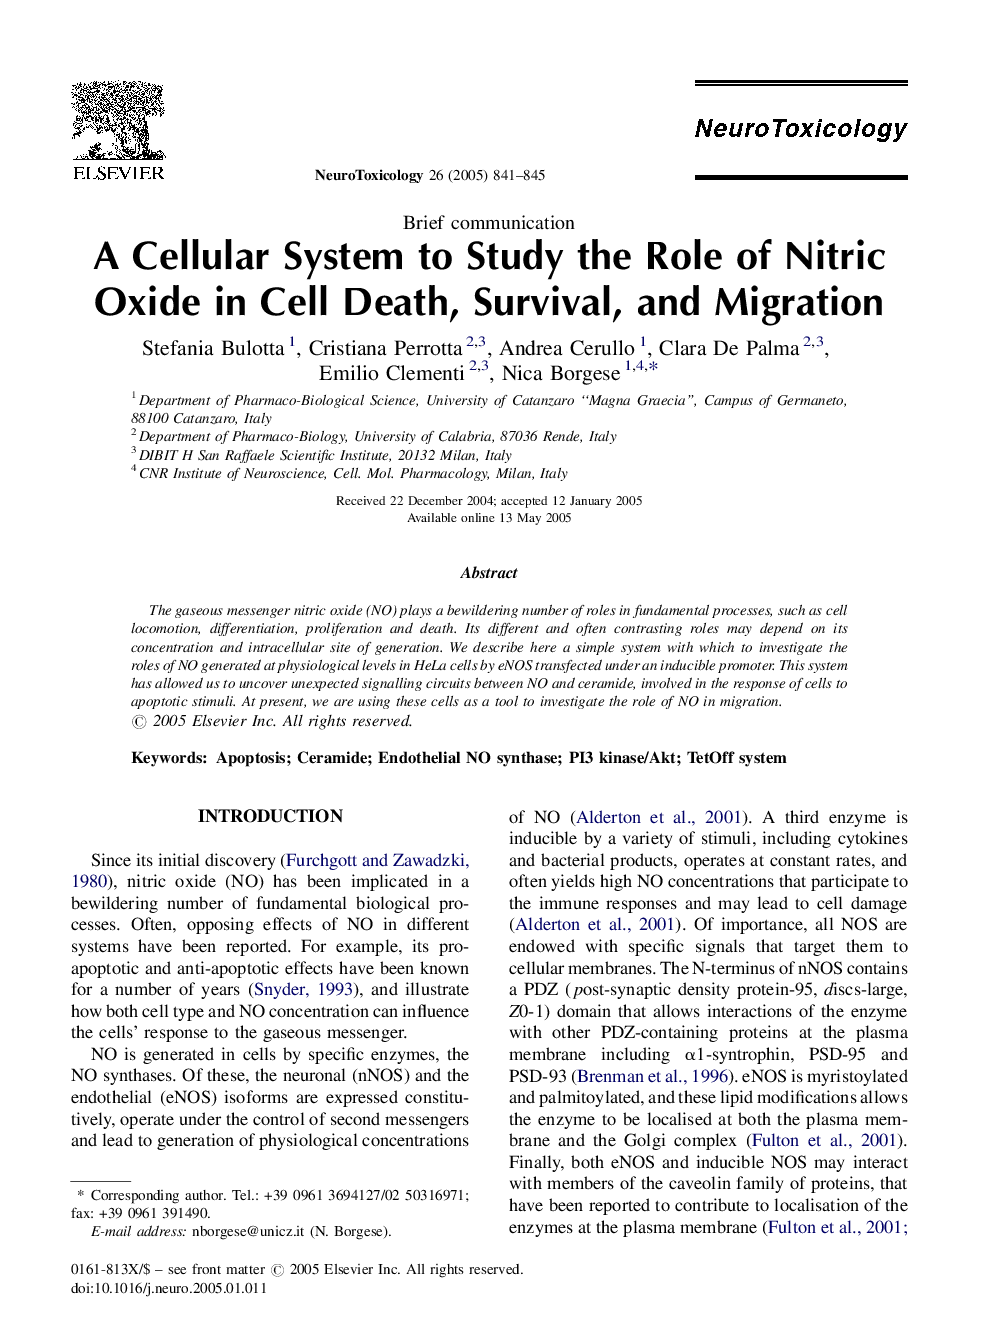 A Cellular System to Study the Role of Nitric Oxide in Cell Death, Survival, and Migration